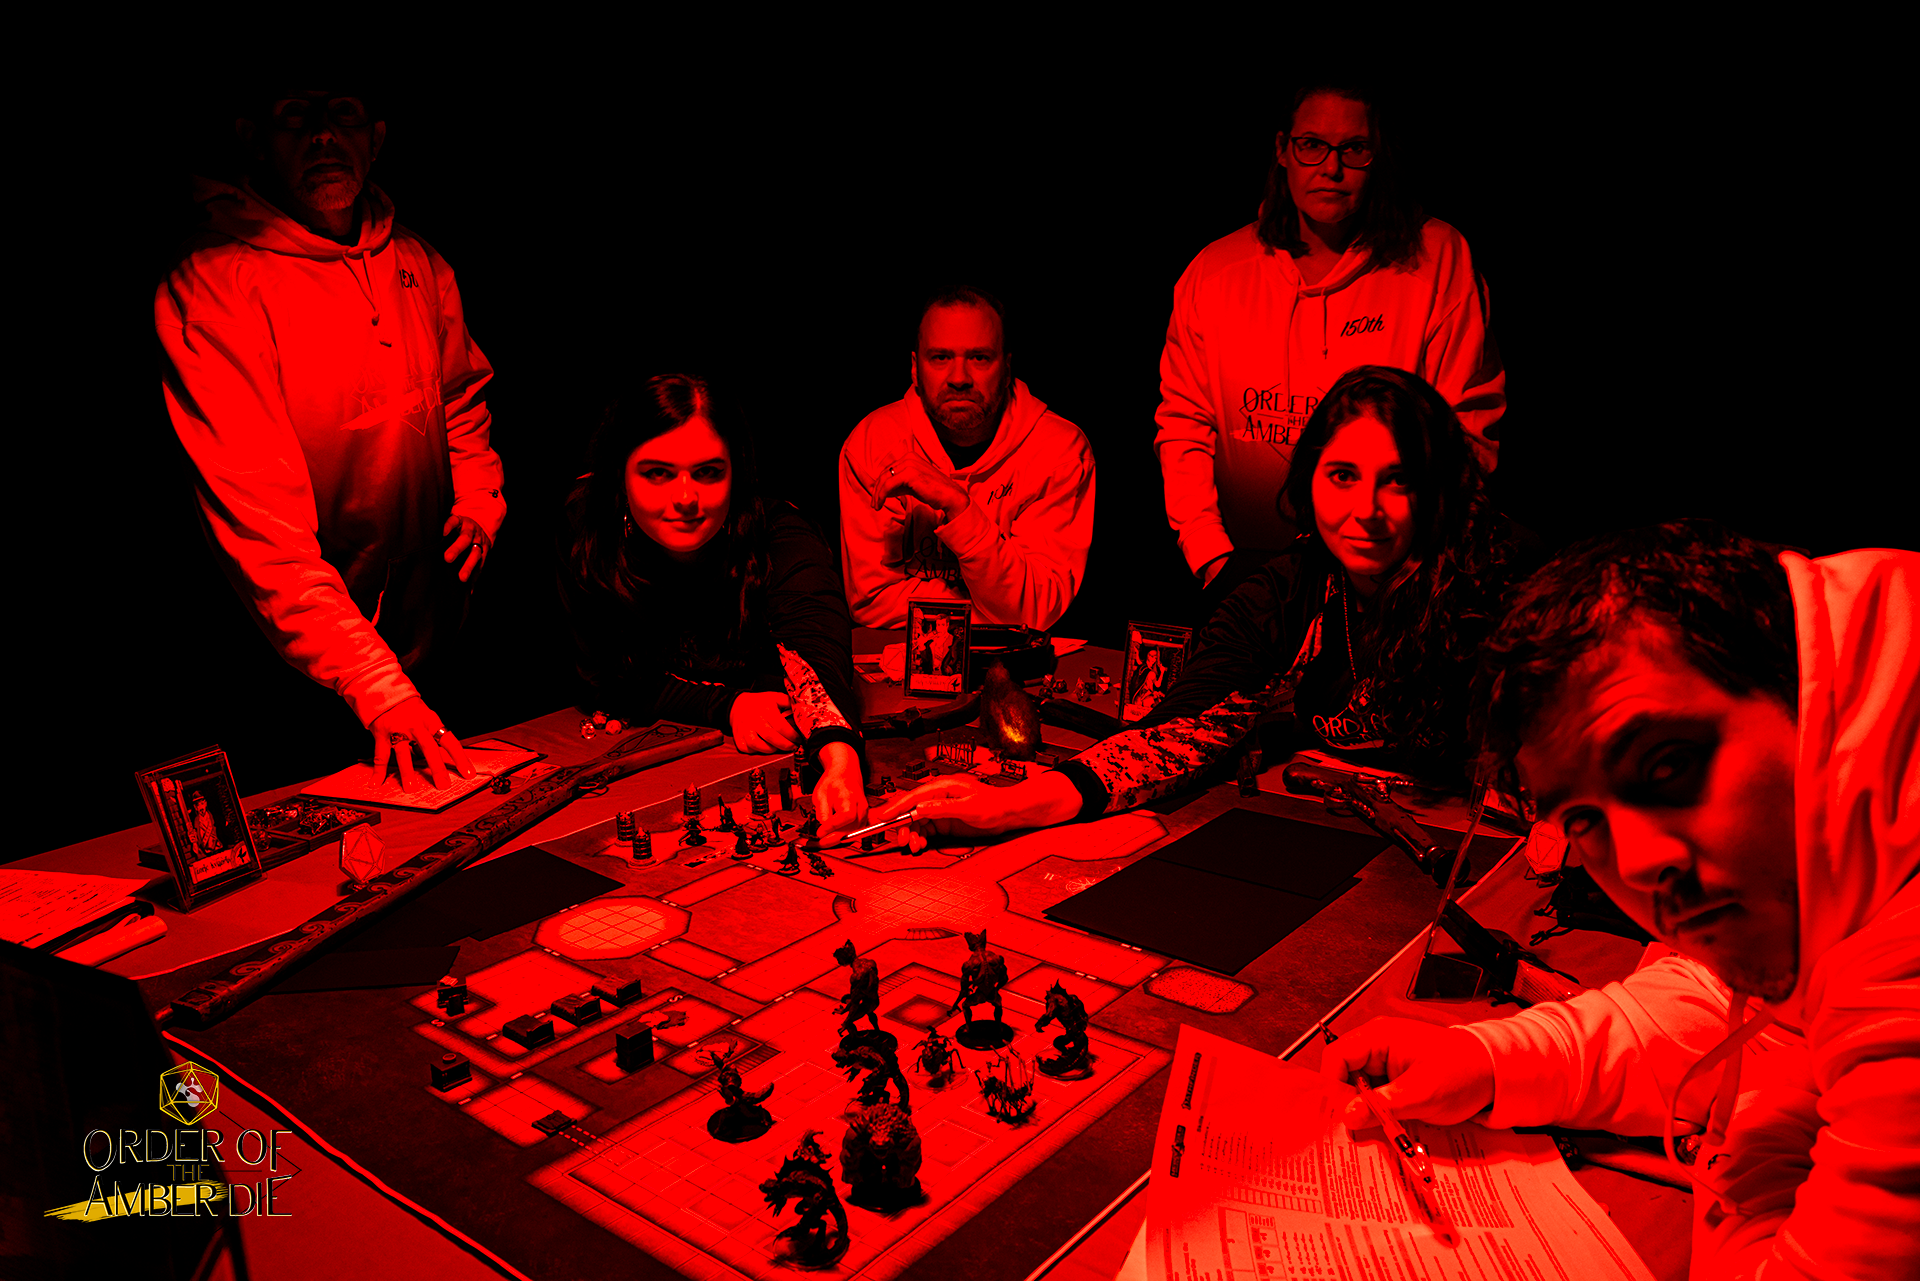 A group photo of the Order of the Amber Die play group under a dark red light